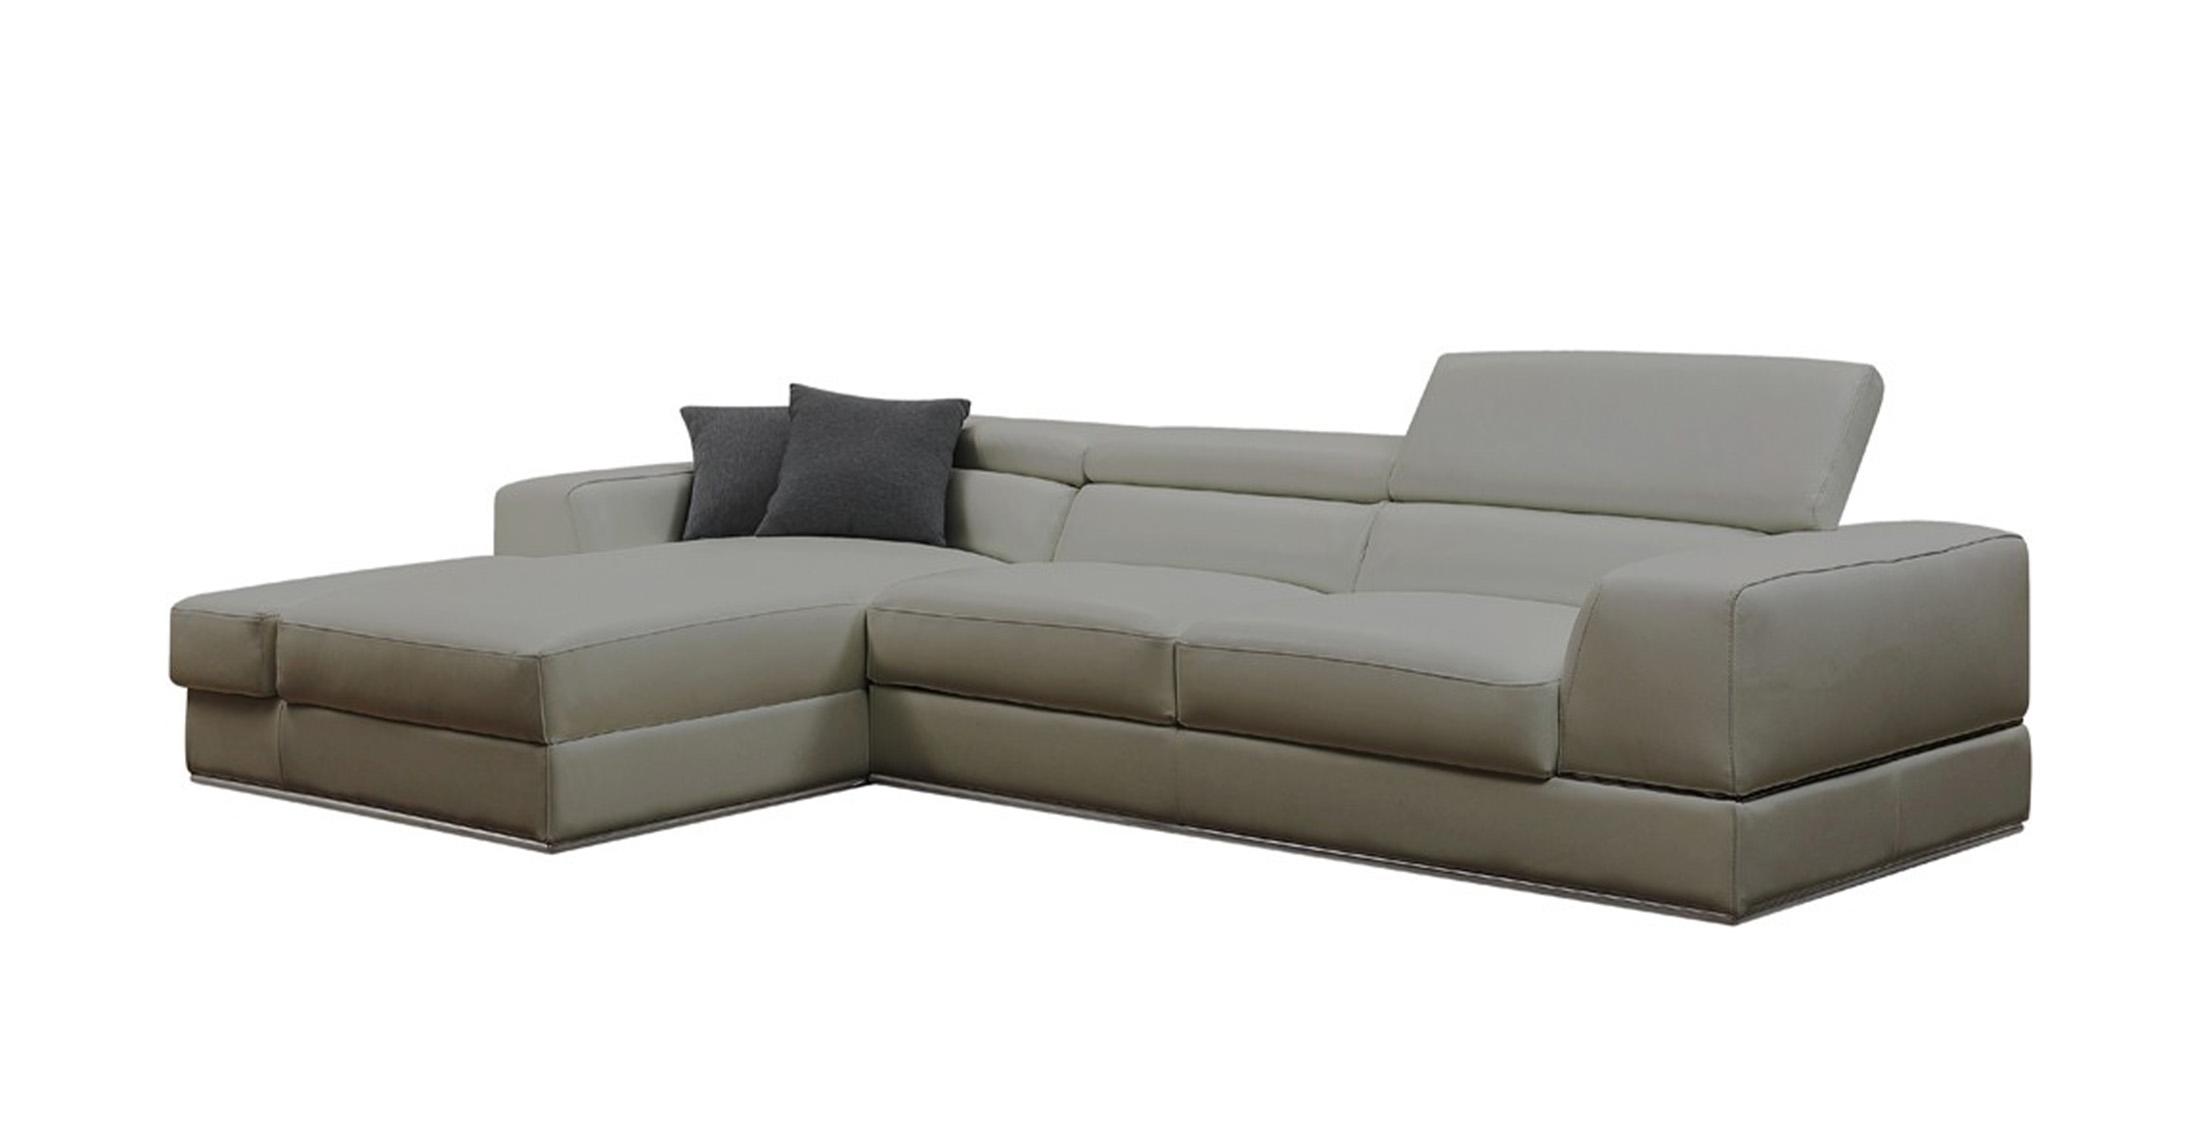 Contemporary, Modern Sectional Sofa VGCA5106A-TPE VGCA5106A-TPE in Taupe Italian Leather